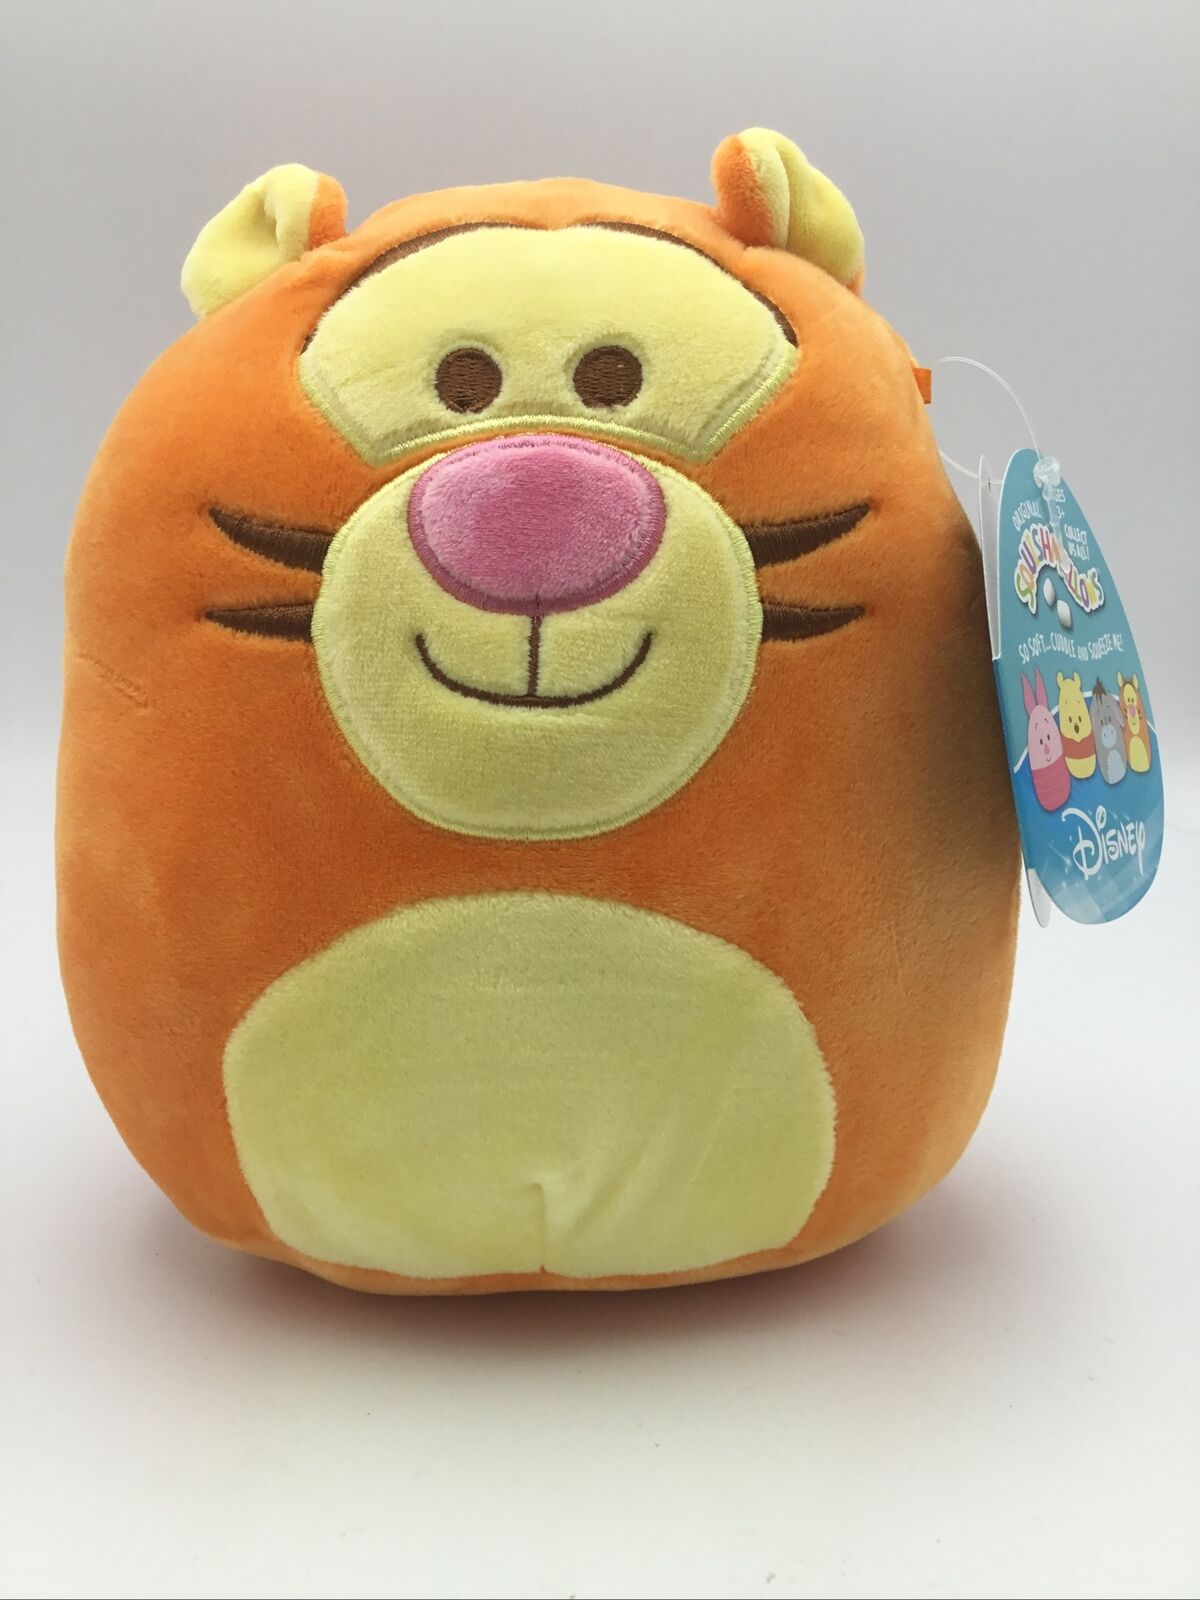 Squishmallows 8 Inch Tigger Winnie the Pooh Super Soft Plush Toy Pet Pillow Animal Pal Buddy Stuffed Animal Birthday Gift Holiday - image 1 of 1